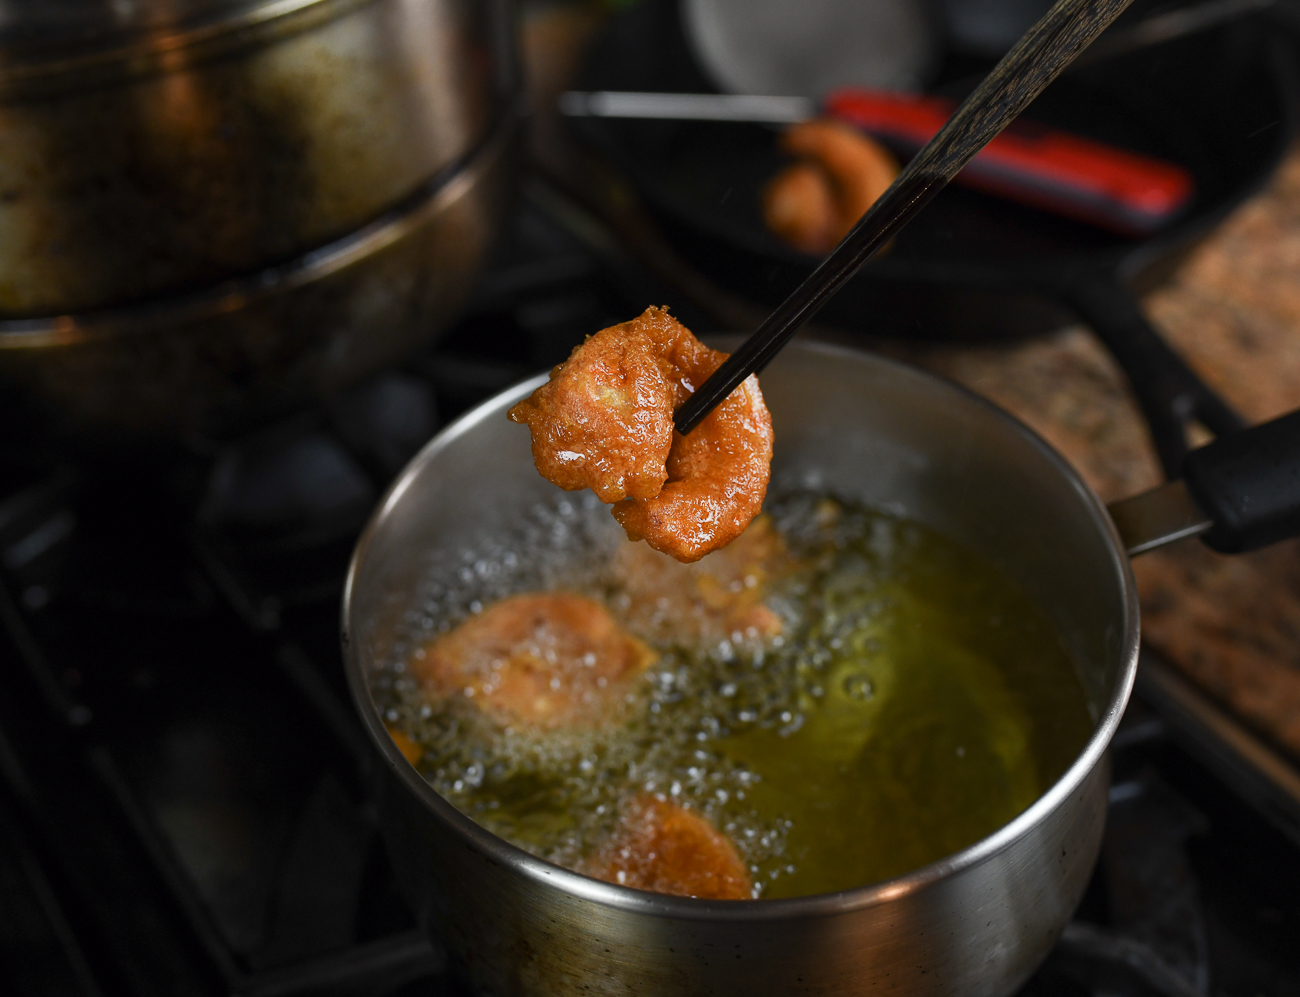 lifting shrimp out of frying oil